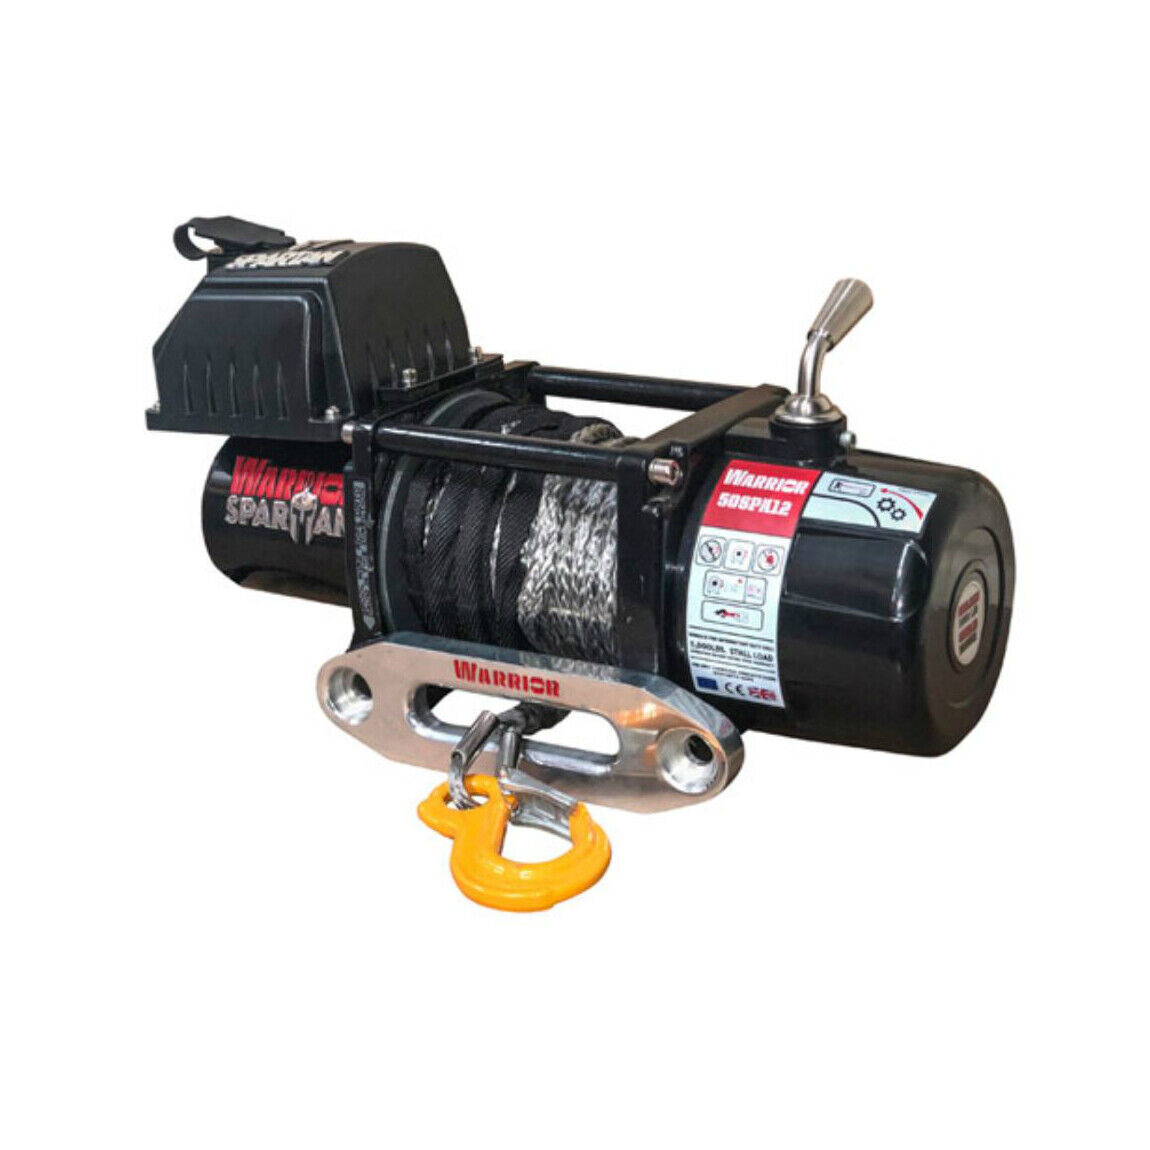 Warrior Spartan 5000 12v Electric Winch With Synthetic Rope 50spa12 Project 1